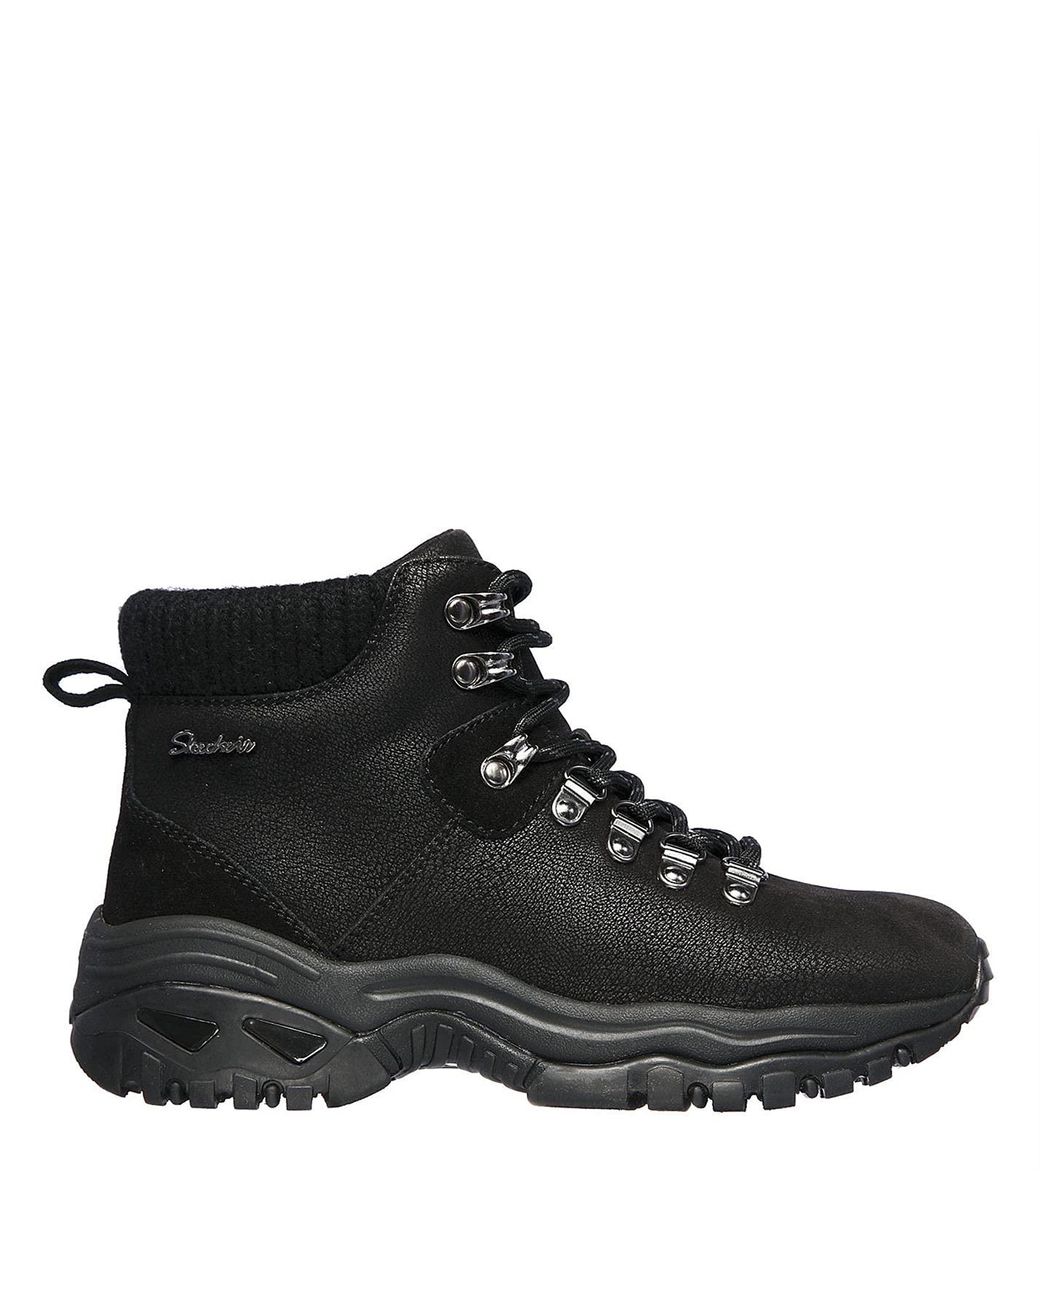 Skechers S Energy Moon Hour Chukka Boots Lace Up Black 8 | Lyst UK